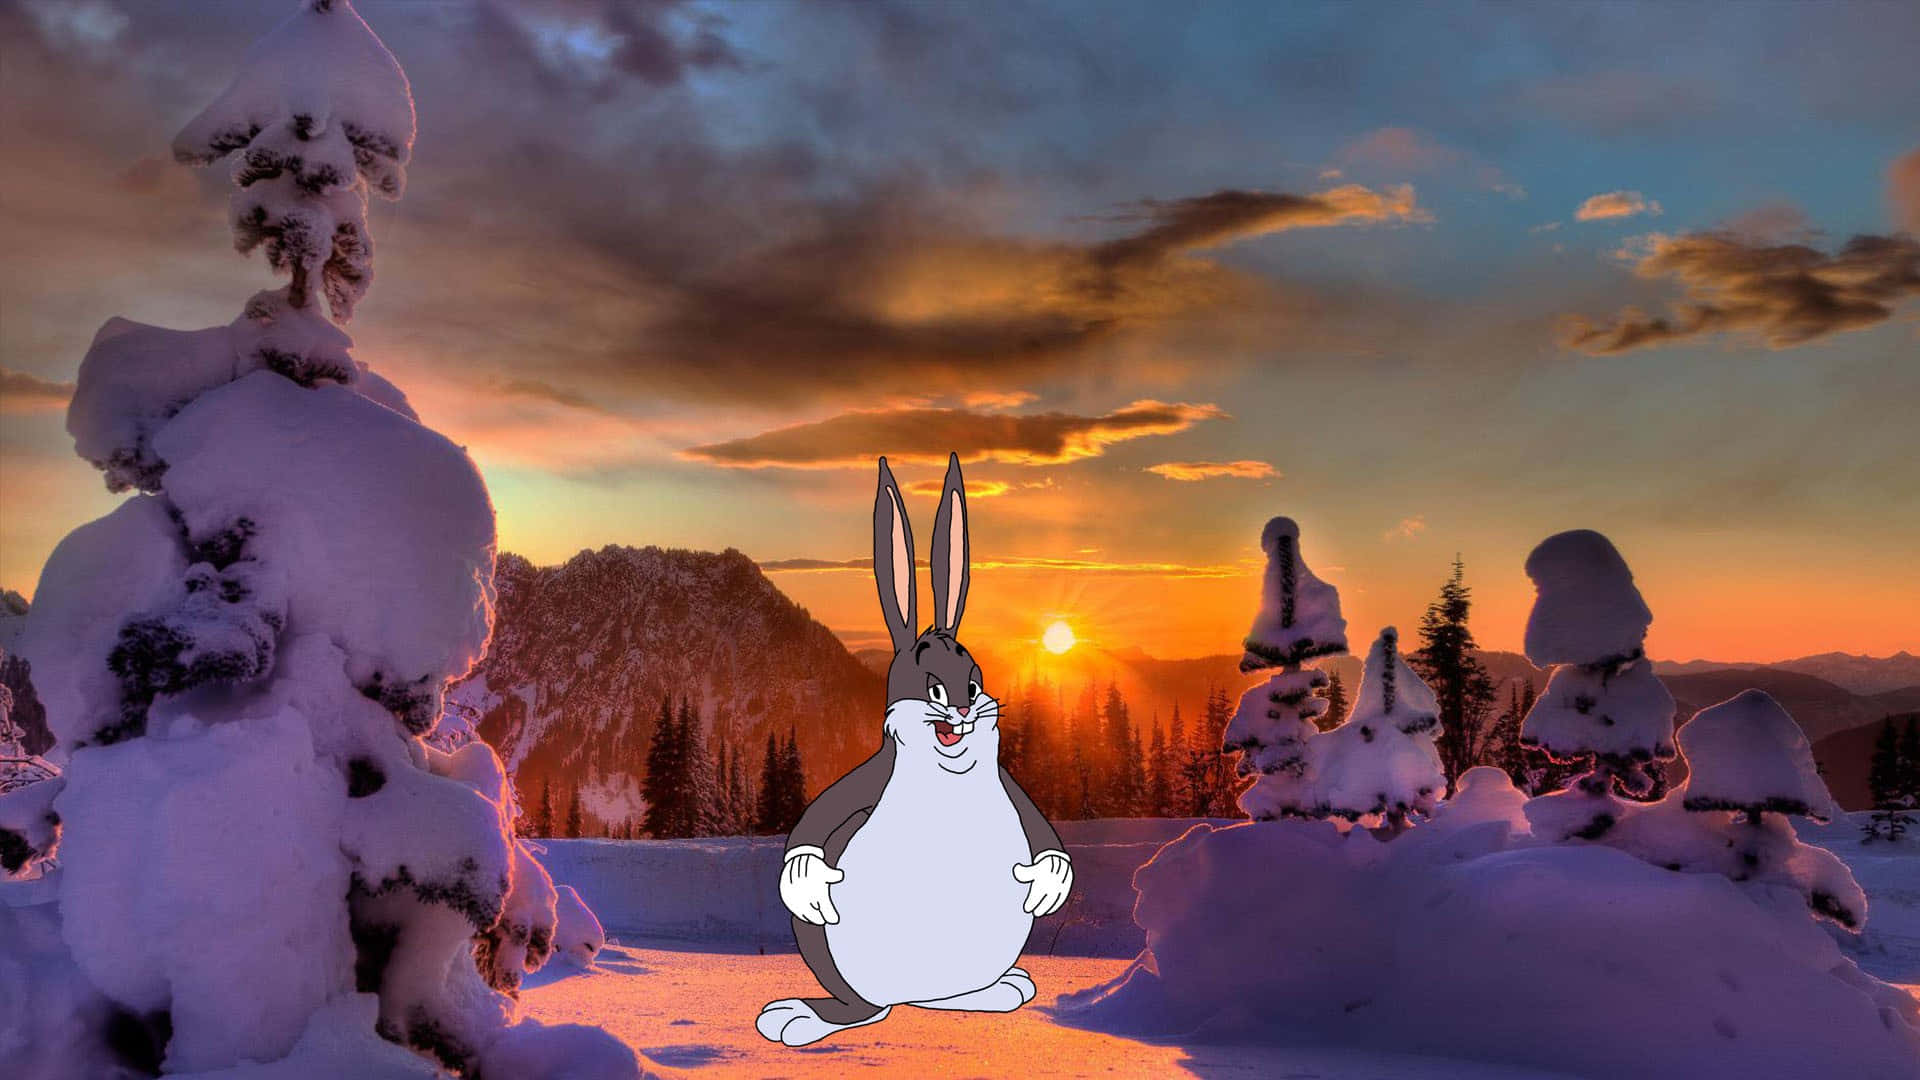 Image Big Chungus Greets You With Open Arms